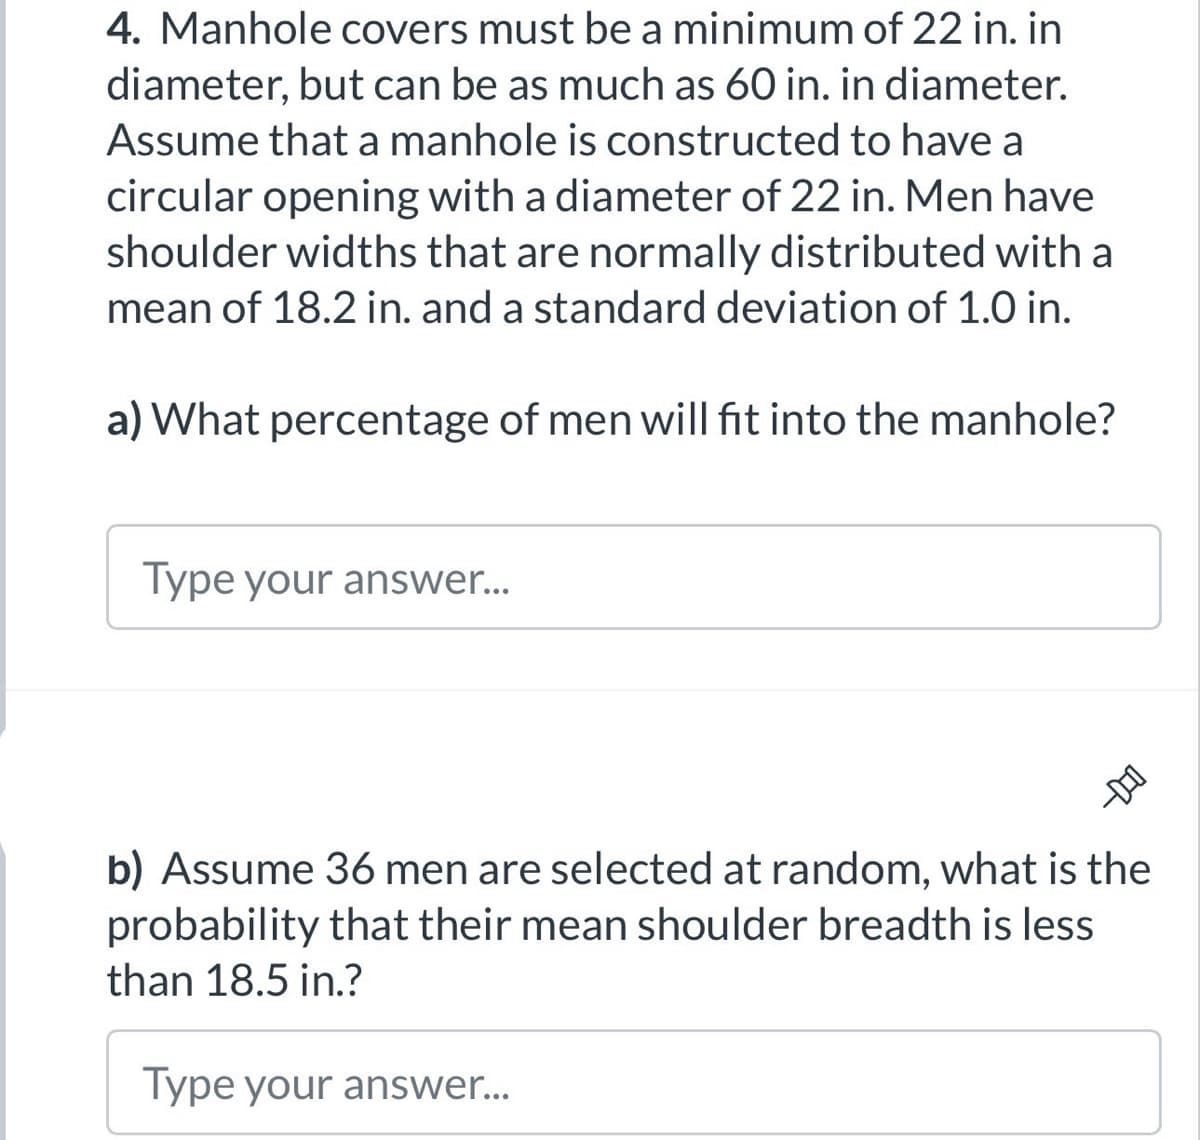 4. Manhole covers must be a minimum of 22 in. in
diameter, but can be as much as 60 in. in diameter.
Assume that a manhole is constructed to have a
circular opening with a diameter of 22 in. Men have
shoulder widths that are normally distributed with a
mean of 18.2 in. and a standard deviation of 1.0 in.
a) What percentage of men will fit into the manhole?
Type your answer...
D
b) Assume 36 men are selected at random, what is the
probability that their mean shoulder breadth is less
than 18.5 in.?
Type your answer...